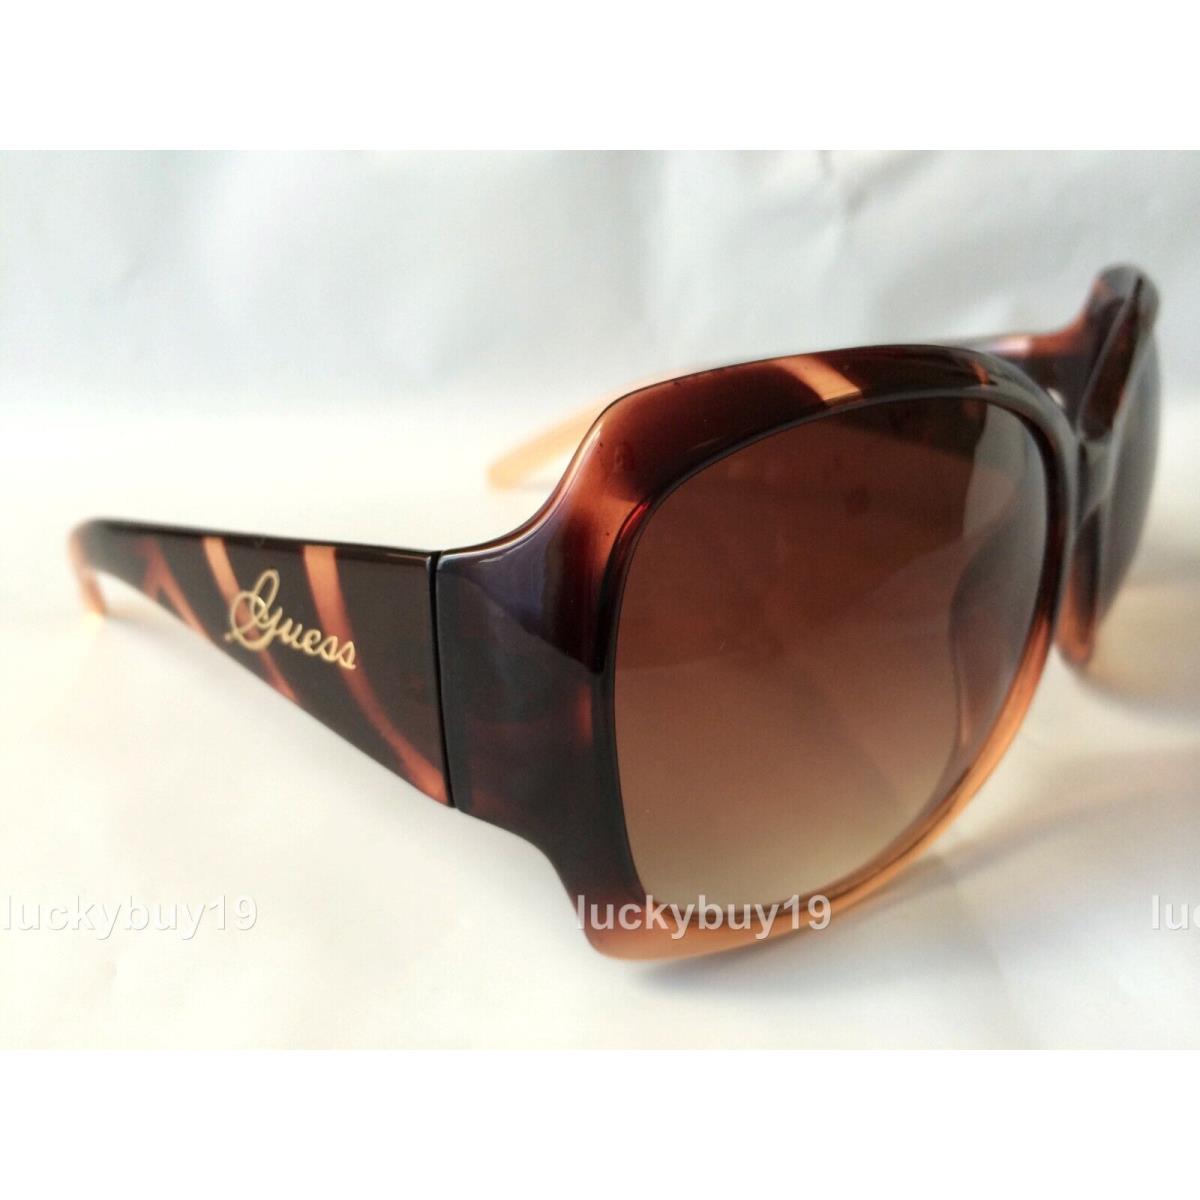 Guess sunglasses  - Brown Frame, Brown Lens 6